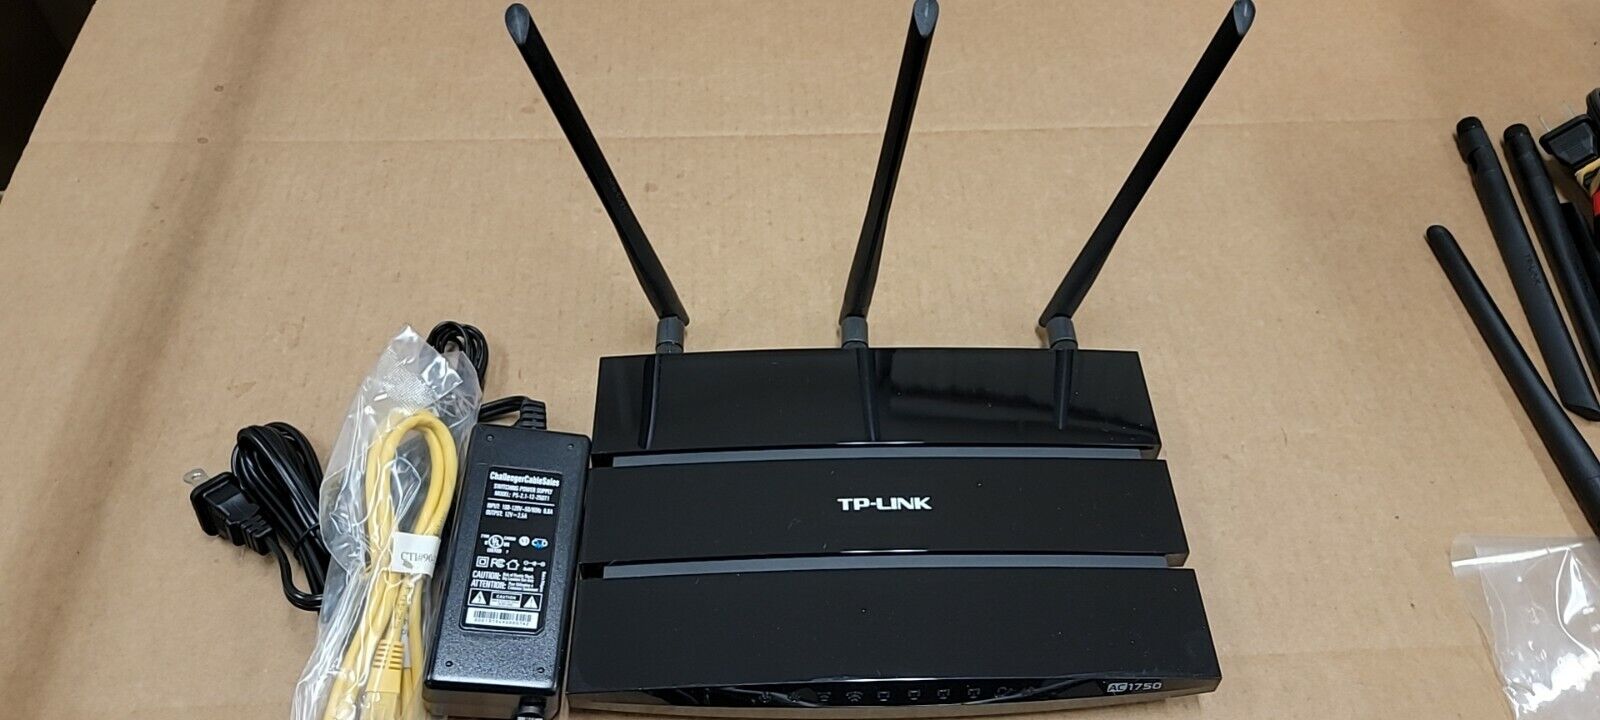 TP-Link Archer C7 AC1750 Wireless Dual Band   Router with AC/Cat 5 Grade A